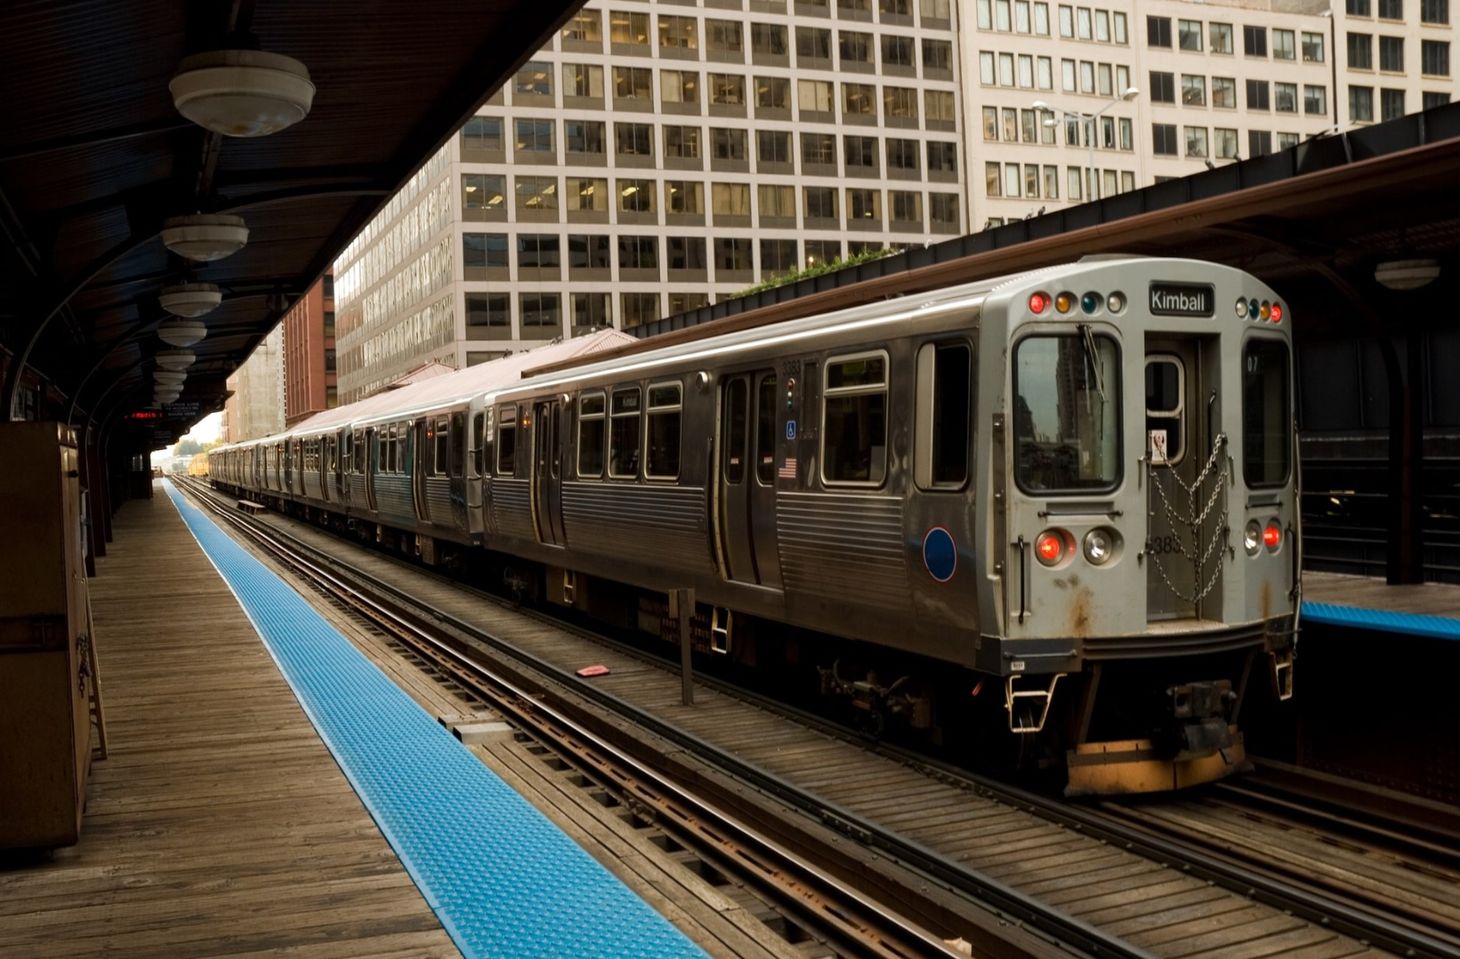 More police promised for Chicago trains after fatal shooting